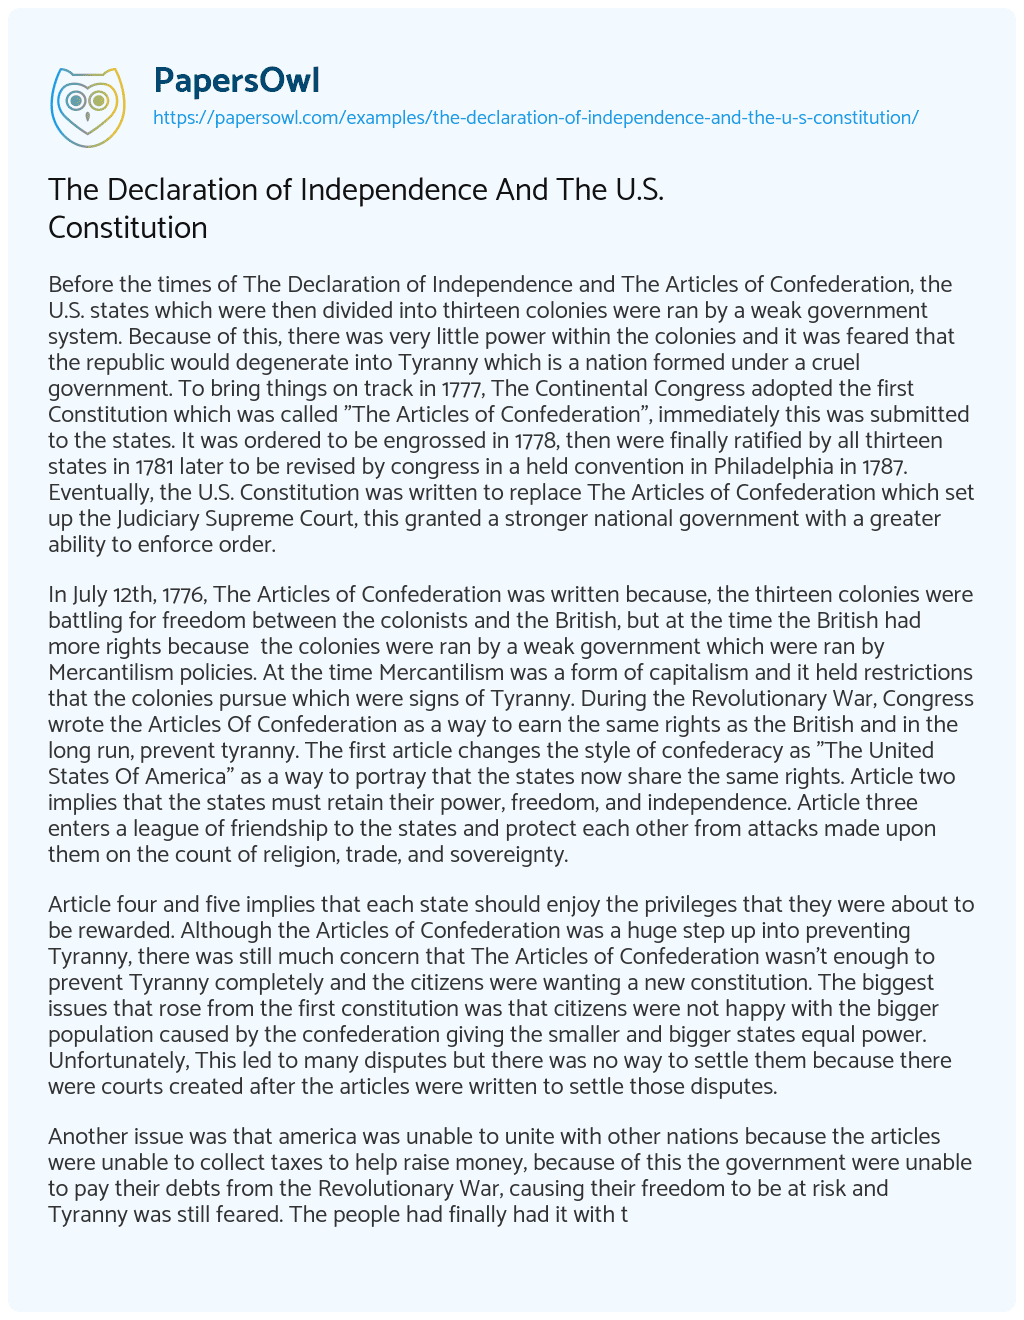 Essay on The Declaration of Independence and the U.S. Constitution